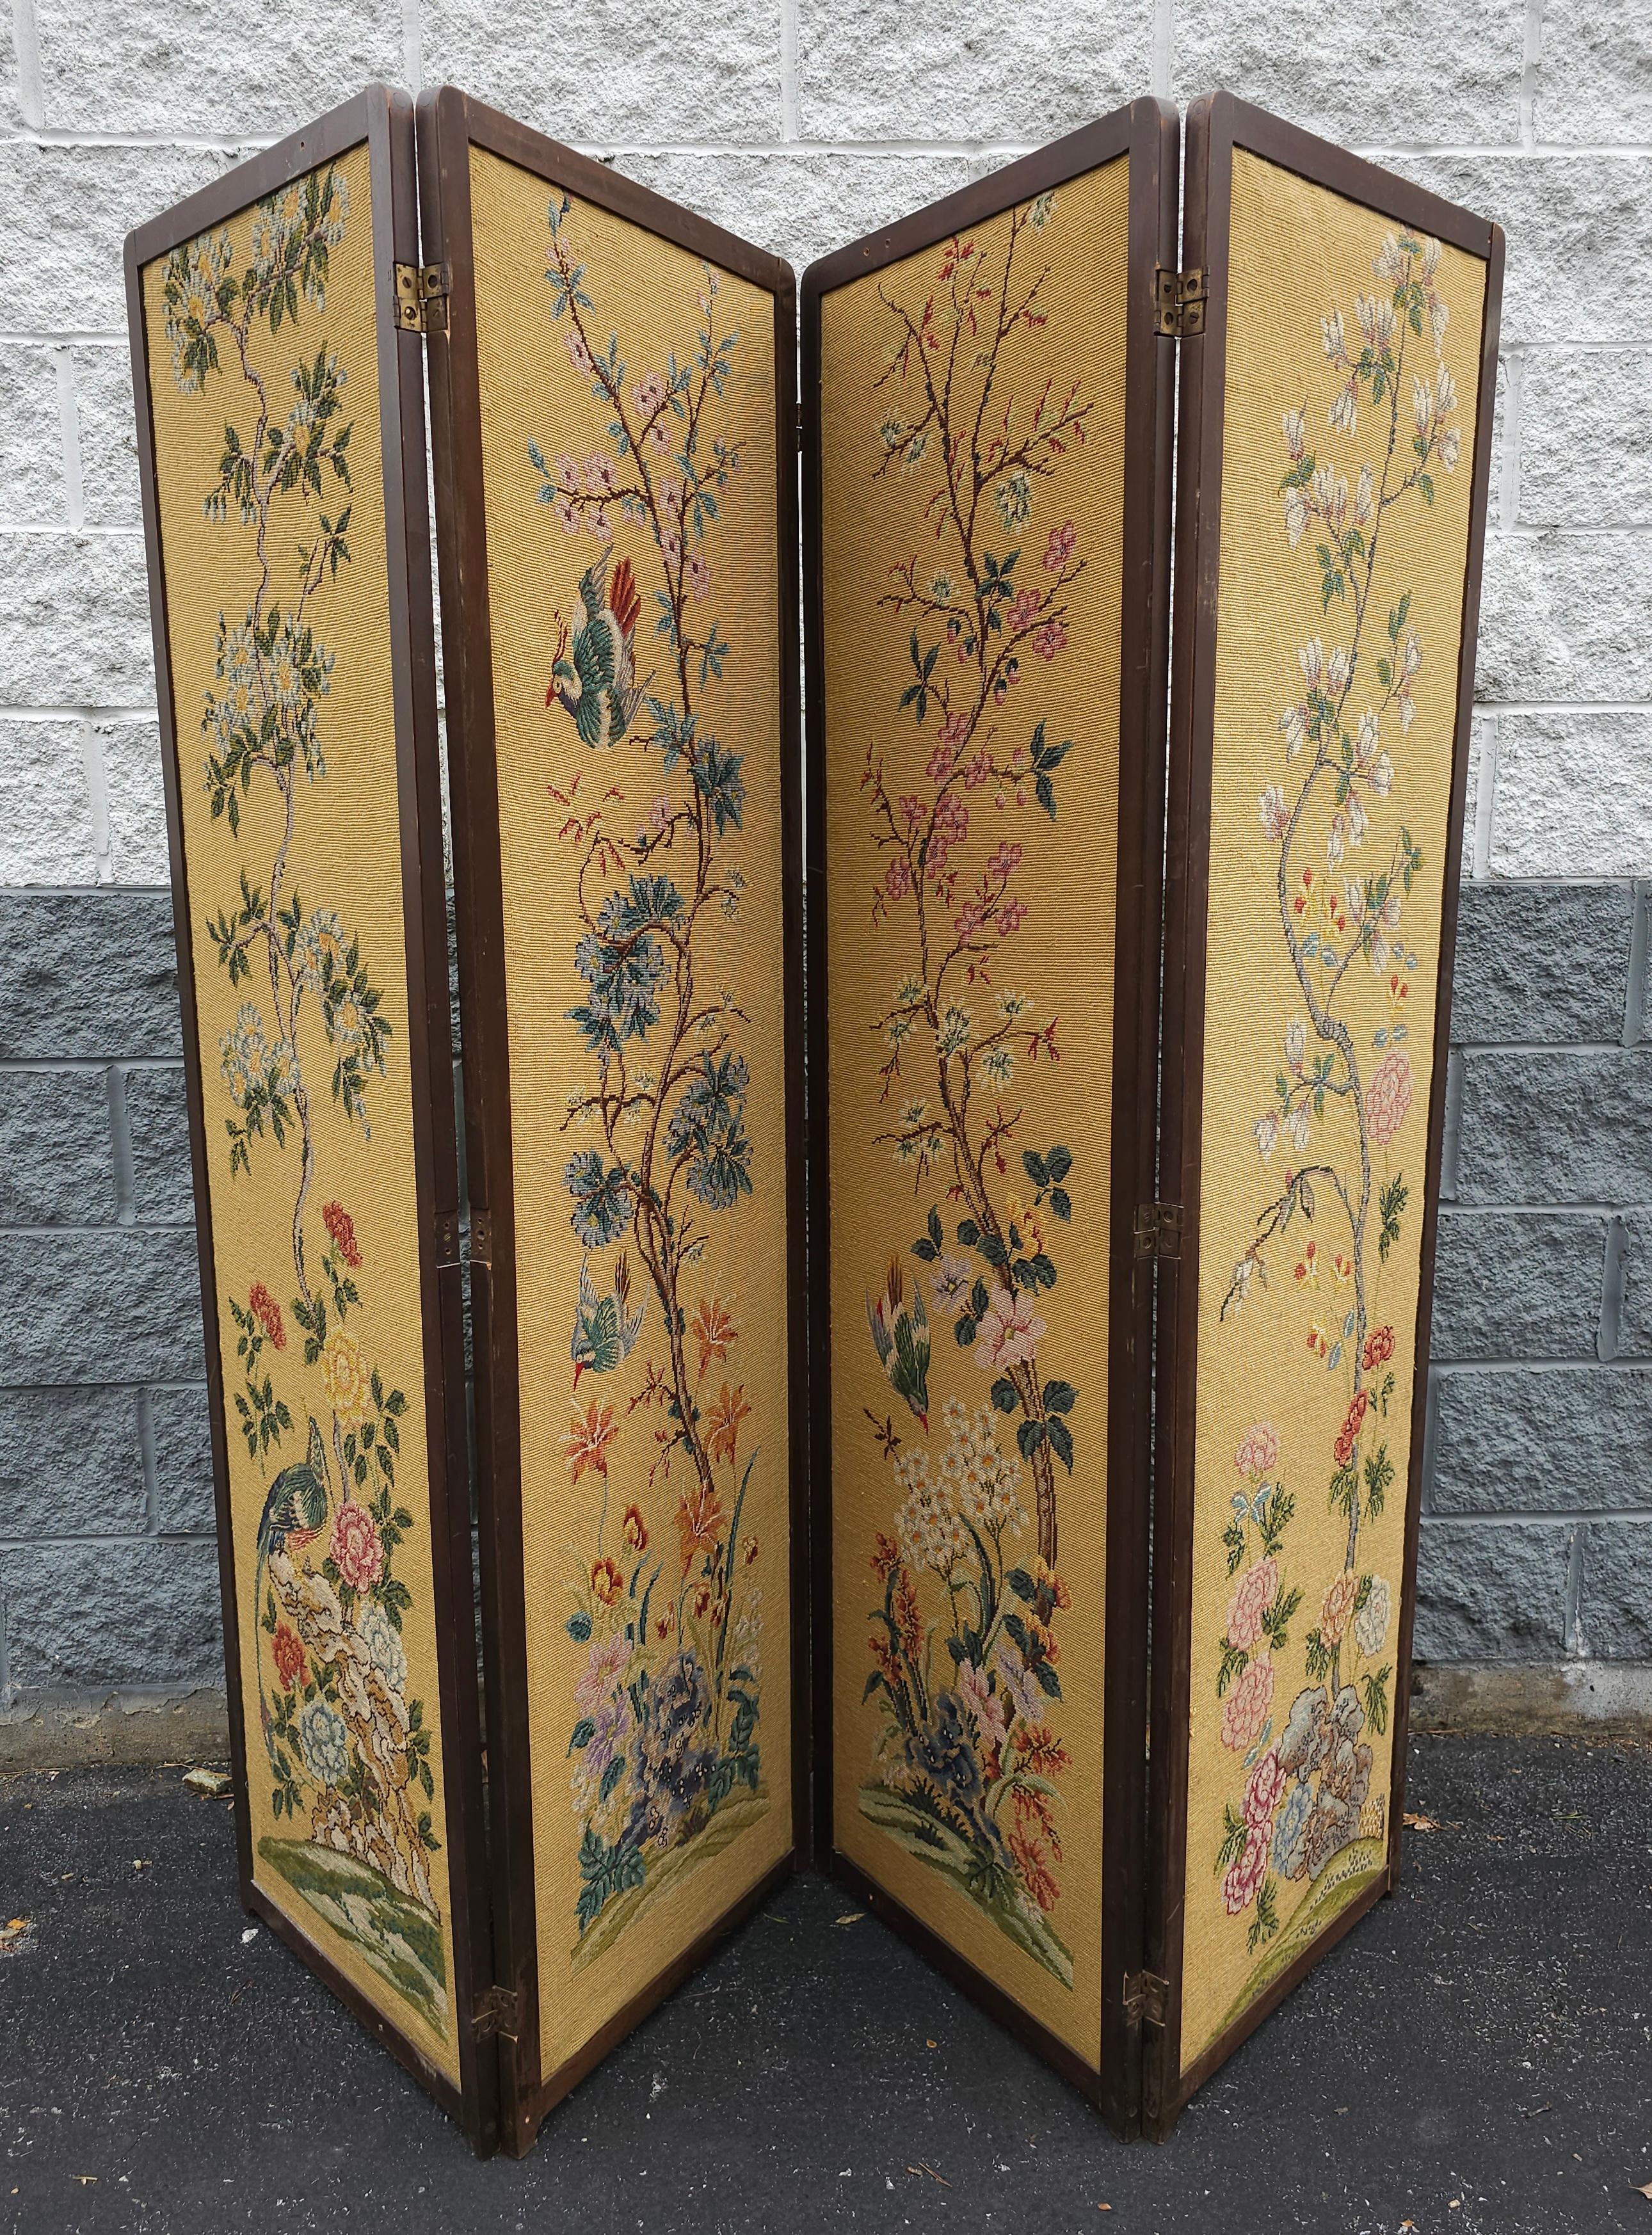 A Victorian Style Needlepoint Flowers & Trees Tapestry Upholstered Four Panel Screen. Measures 78